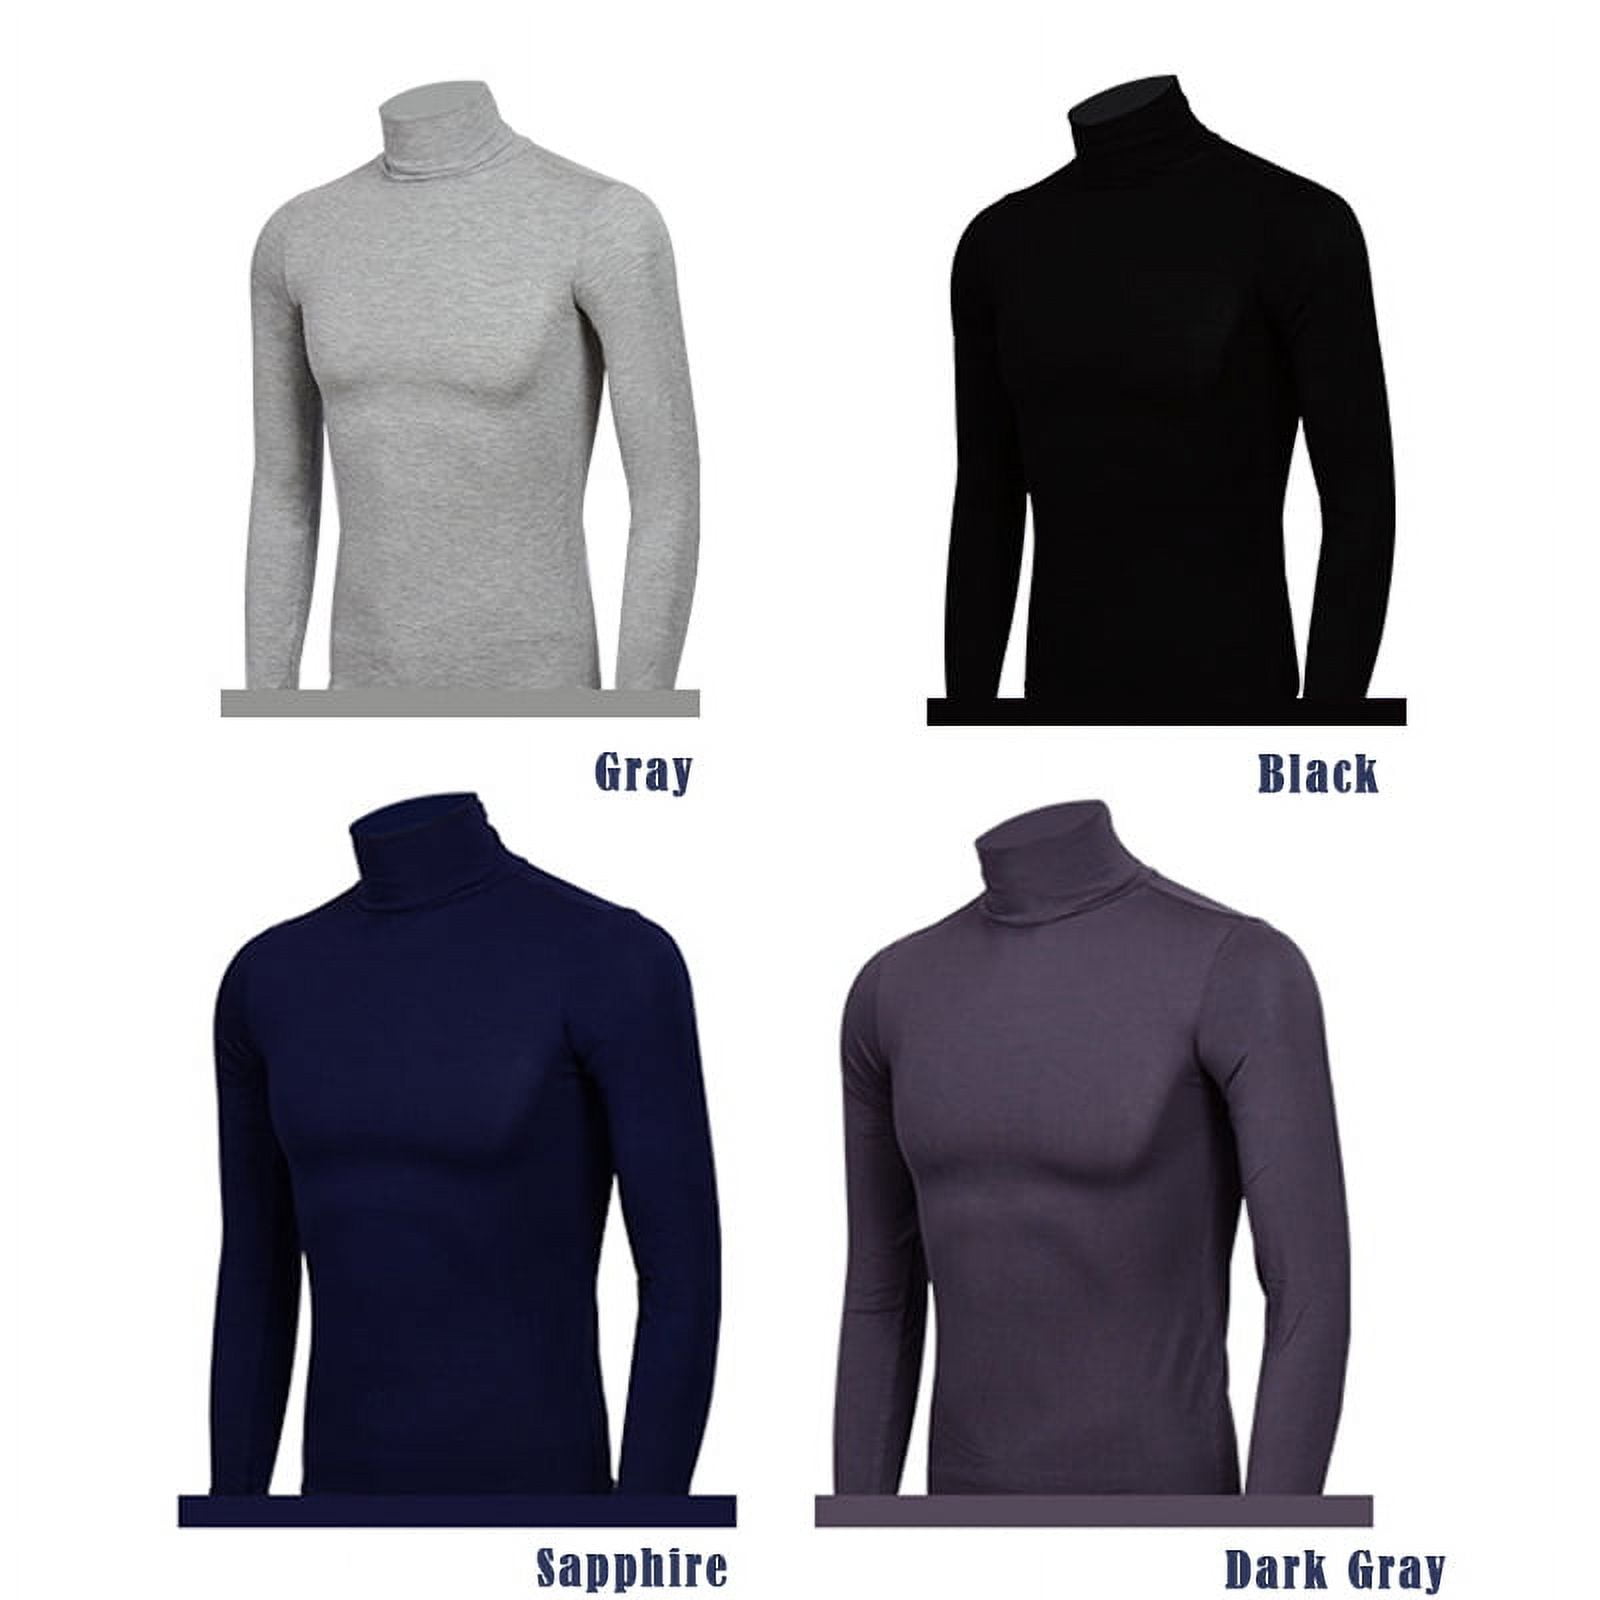 Buy [Tesla] Compression Wear, High Neck, Men's, Brushed Lined [Moisture  Absorption, Quick Drying, Lightweight Heat Retention, Elasticity] Long  Sleeve, Compression Top, Undershirt, Sports Inner, Cold Gear, Winter Inner  Shirt, Turtleneck from Japan 